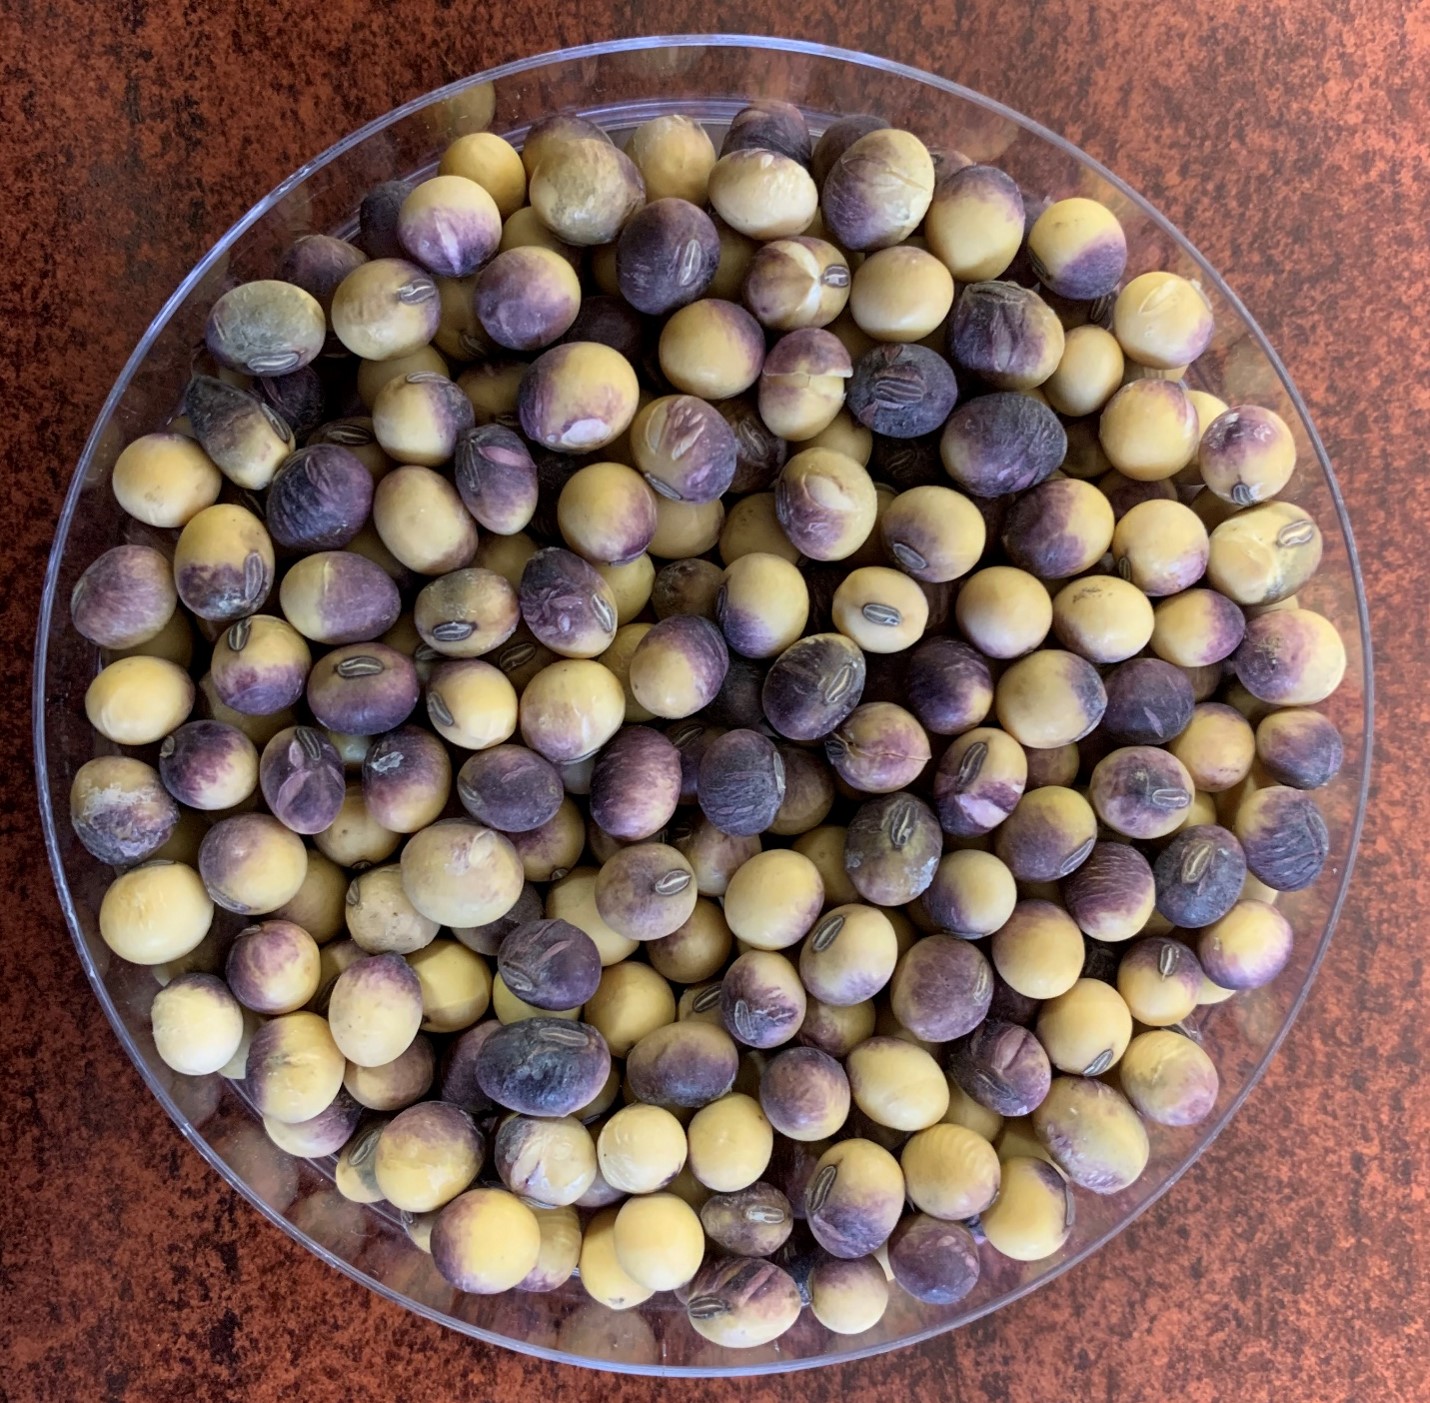 A bowl of soybeans infected with Purple Seed Stain, with a purple stained appearance.